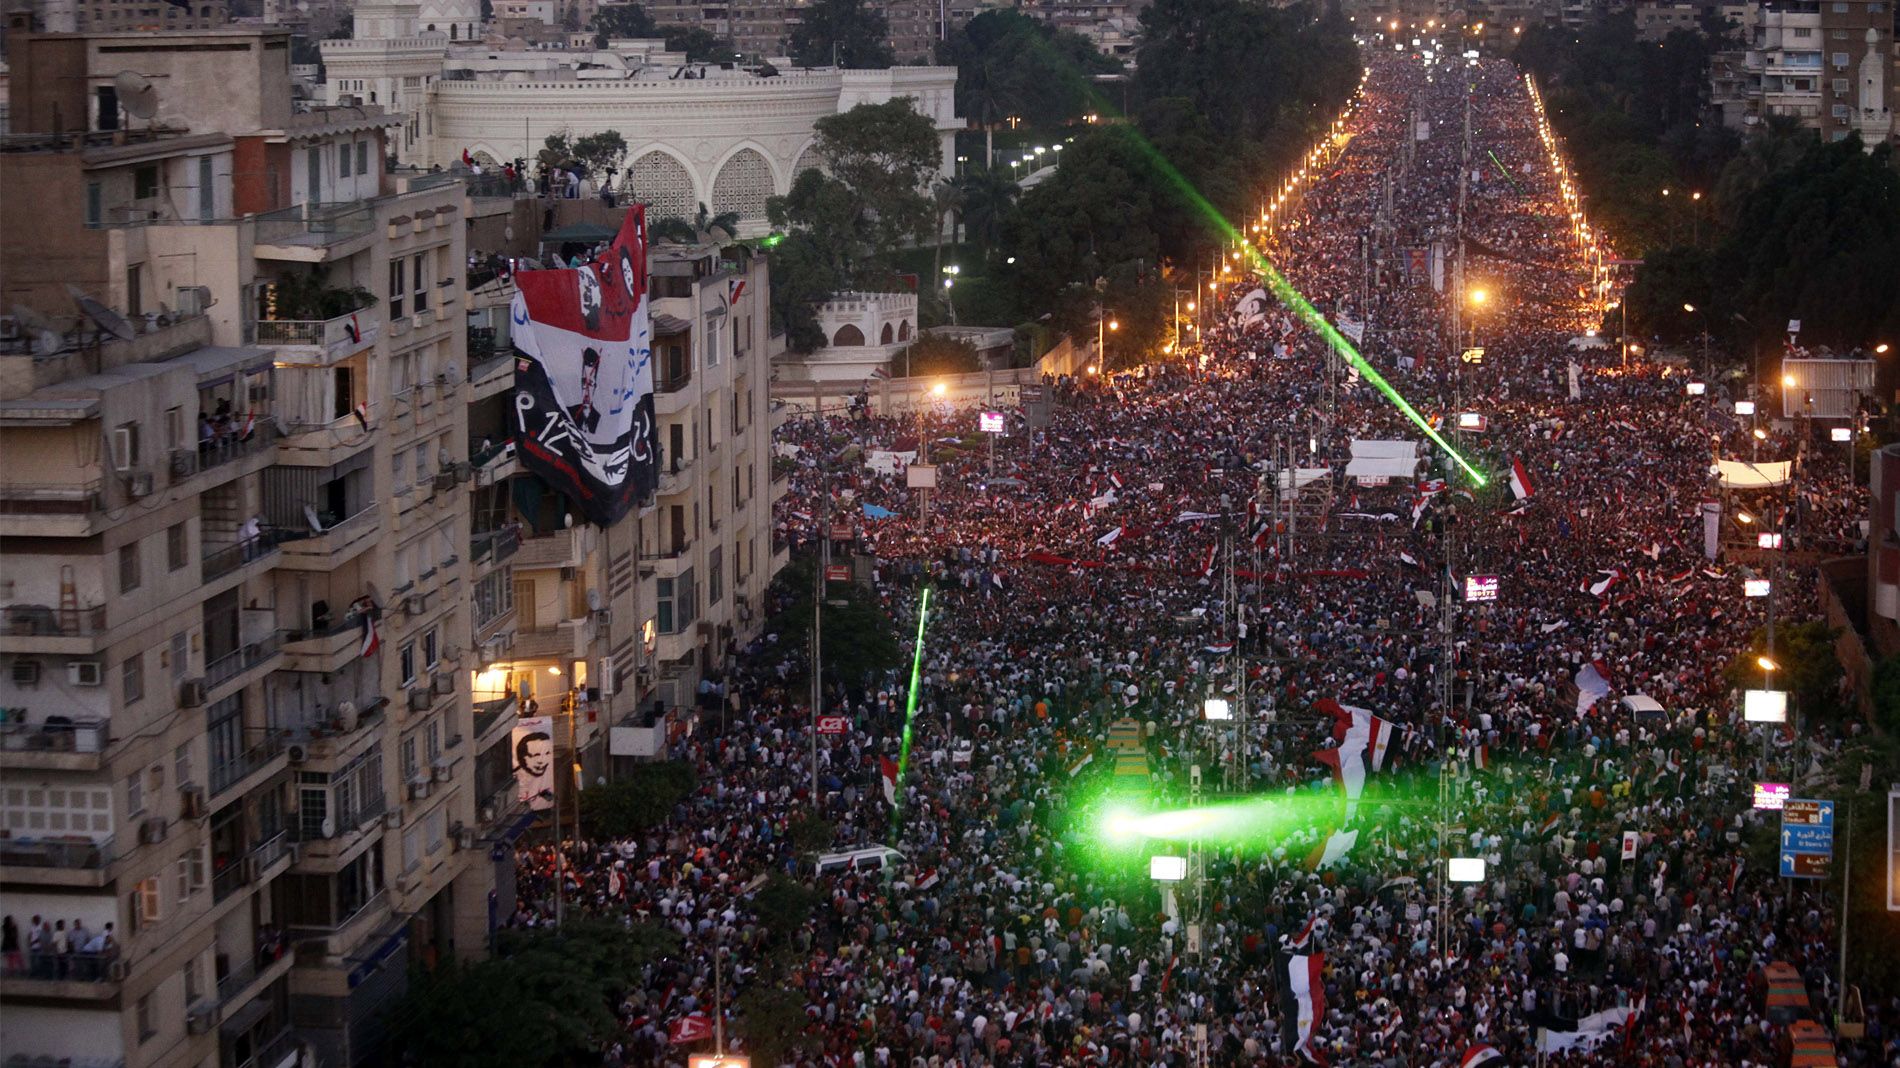 Freedom: A Personal Account from an Egyptian Protester